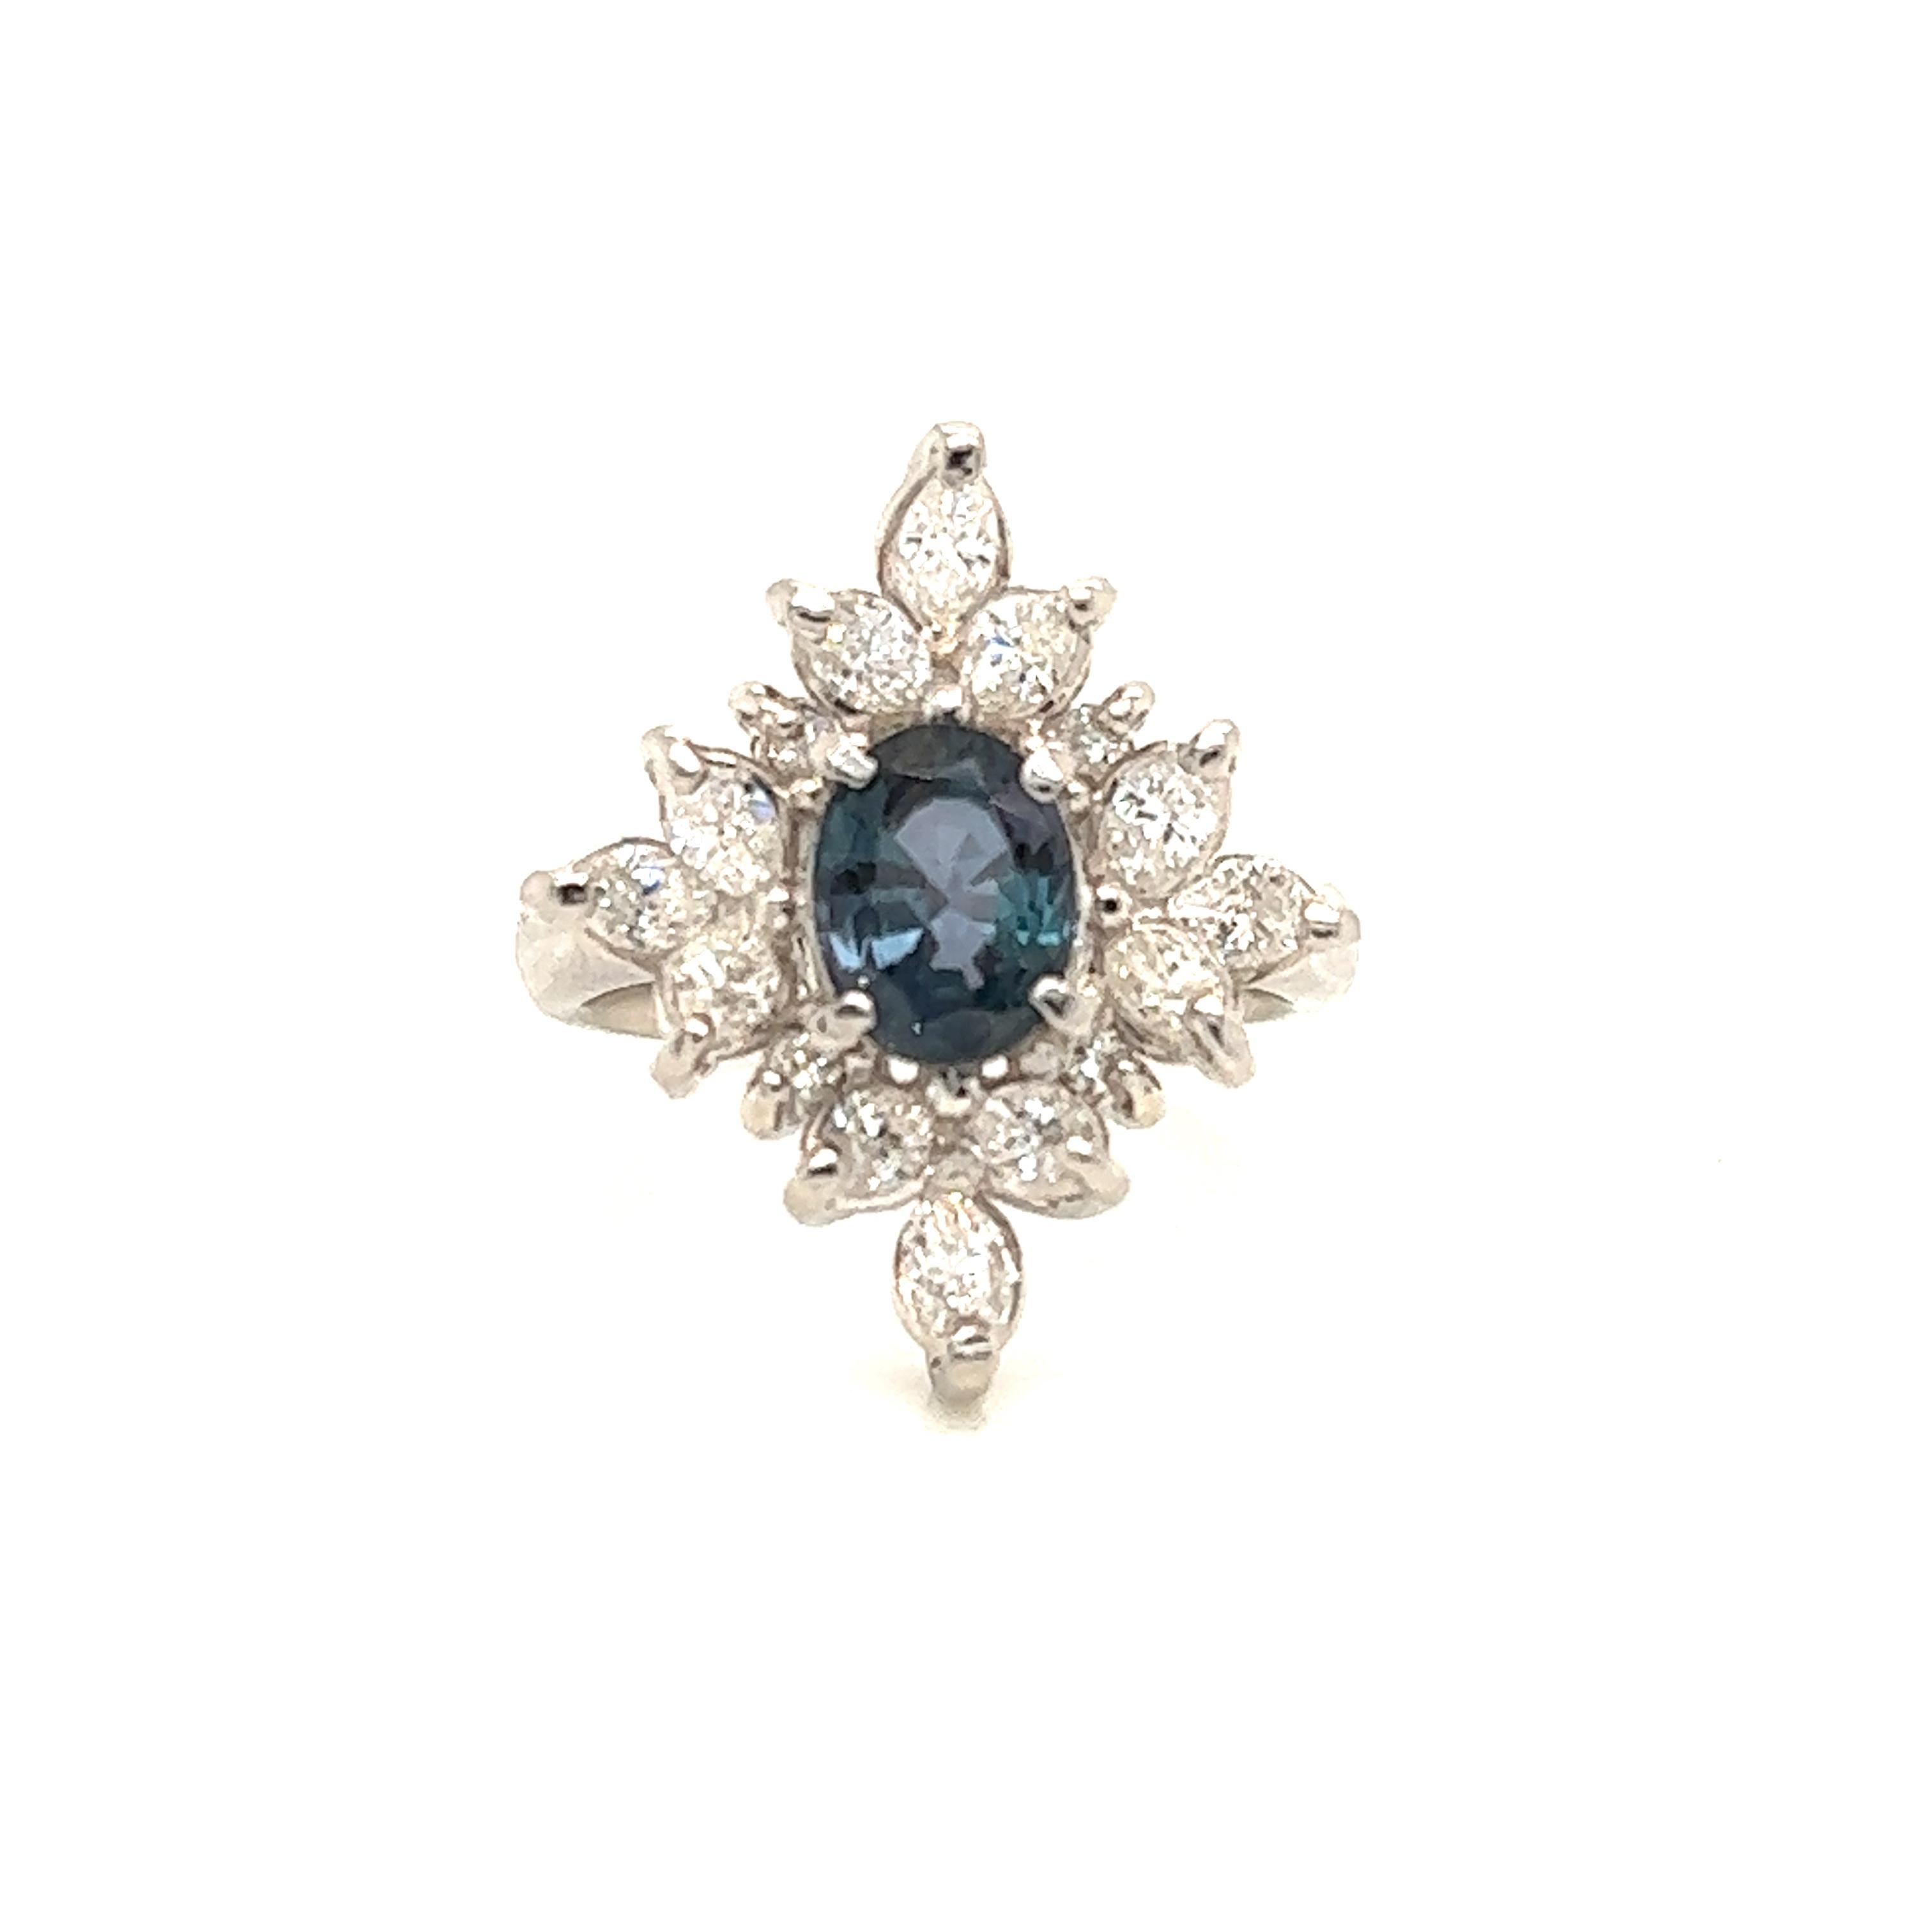 This is a gorgeous natural AAA quality Oval Alexandrite surrounded by dainty diamonds that is set in a vintage platinum setting. This ring features a natural 1.52 carat oval alexandrite that is certified by the Gemological Institute of America (GIA)